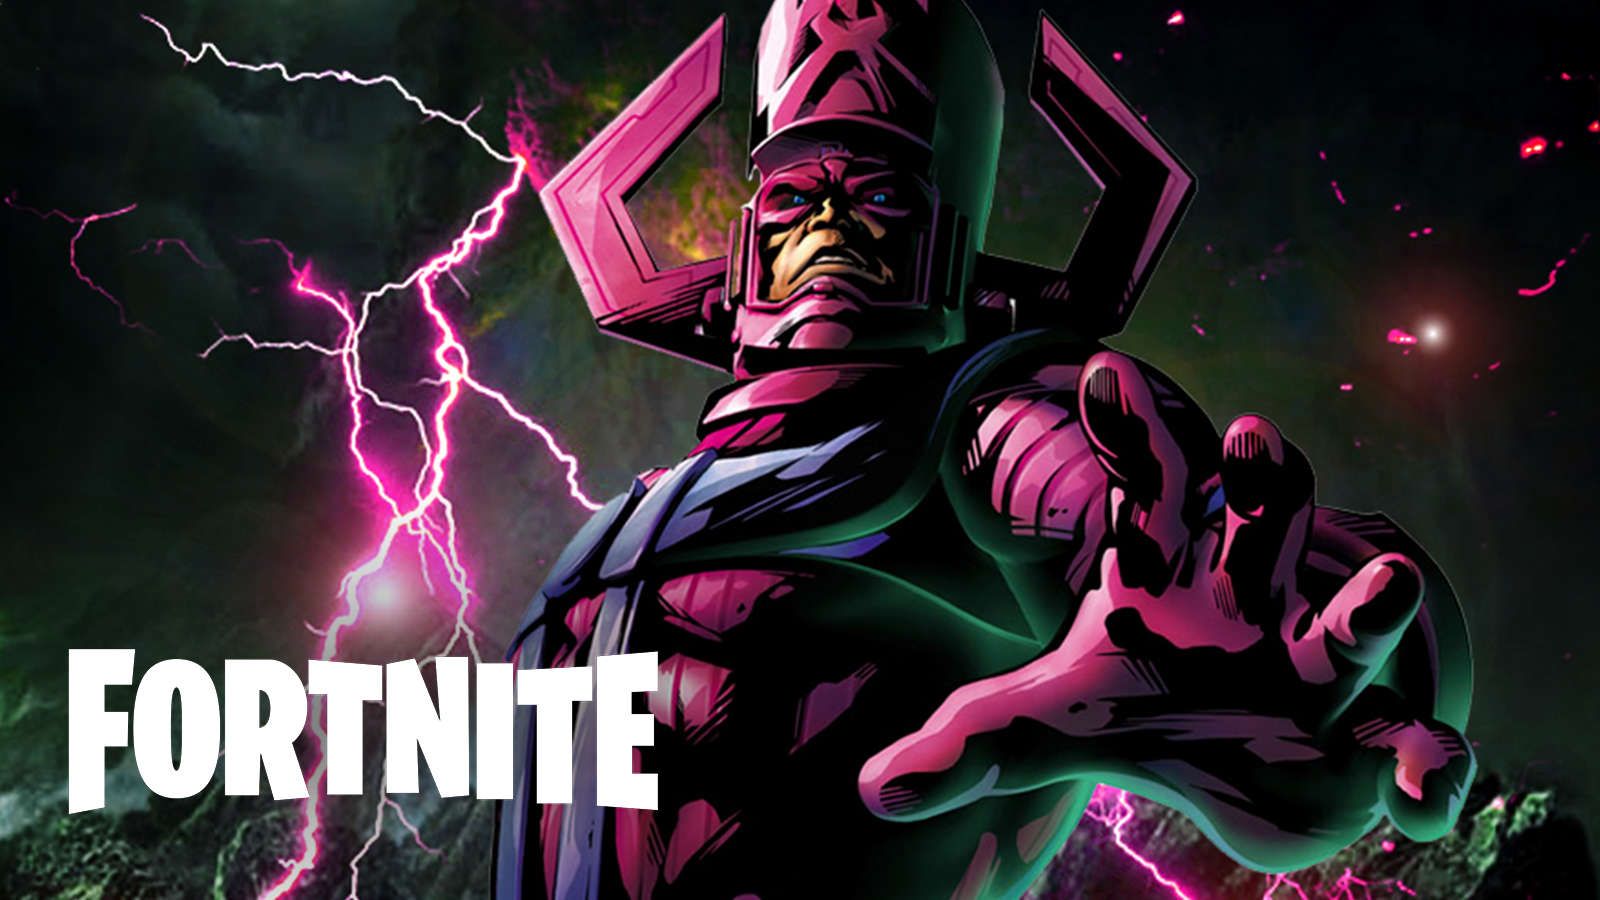 Fortnite just secretly added Galactus to map in v14.30 update